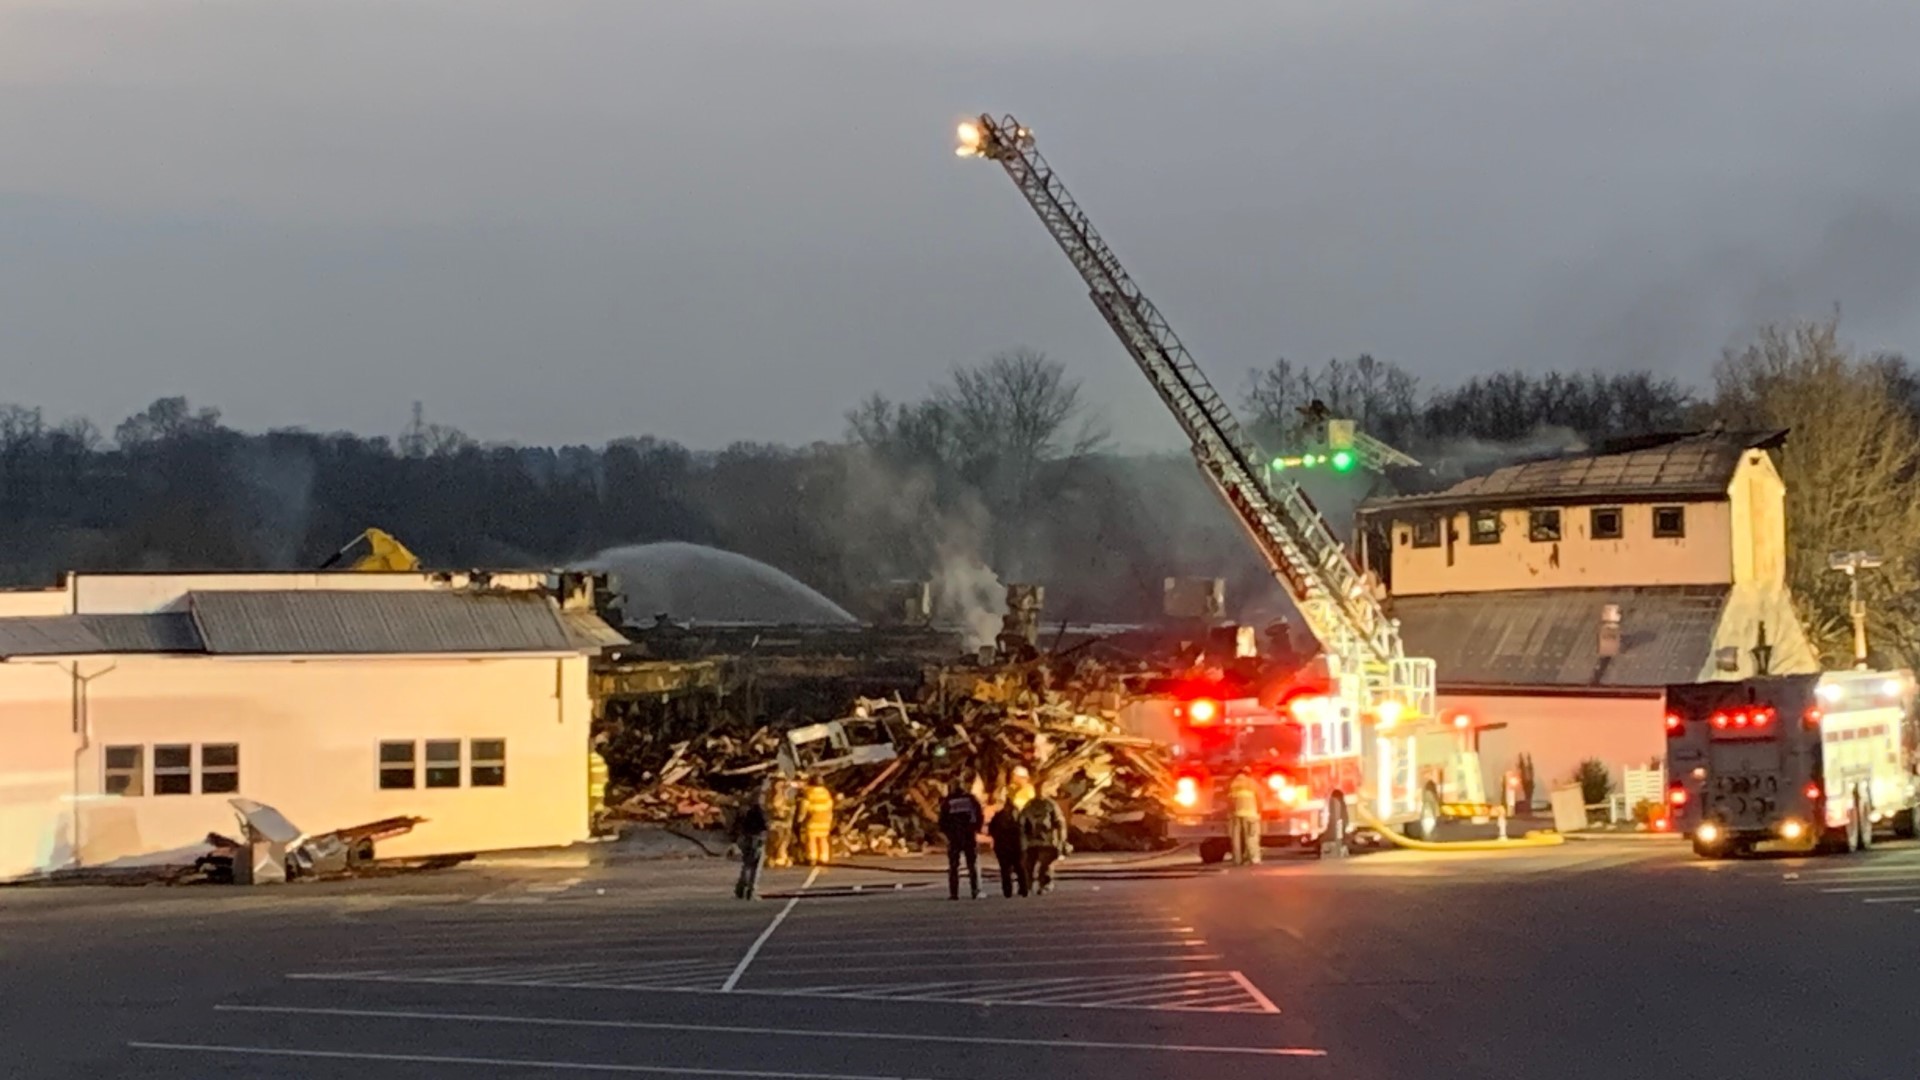 According to 911 dispatchers, the fire broke out around noon at Hershey Farm Restaurant & Inn in Strasburg Township.